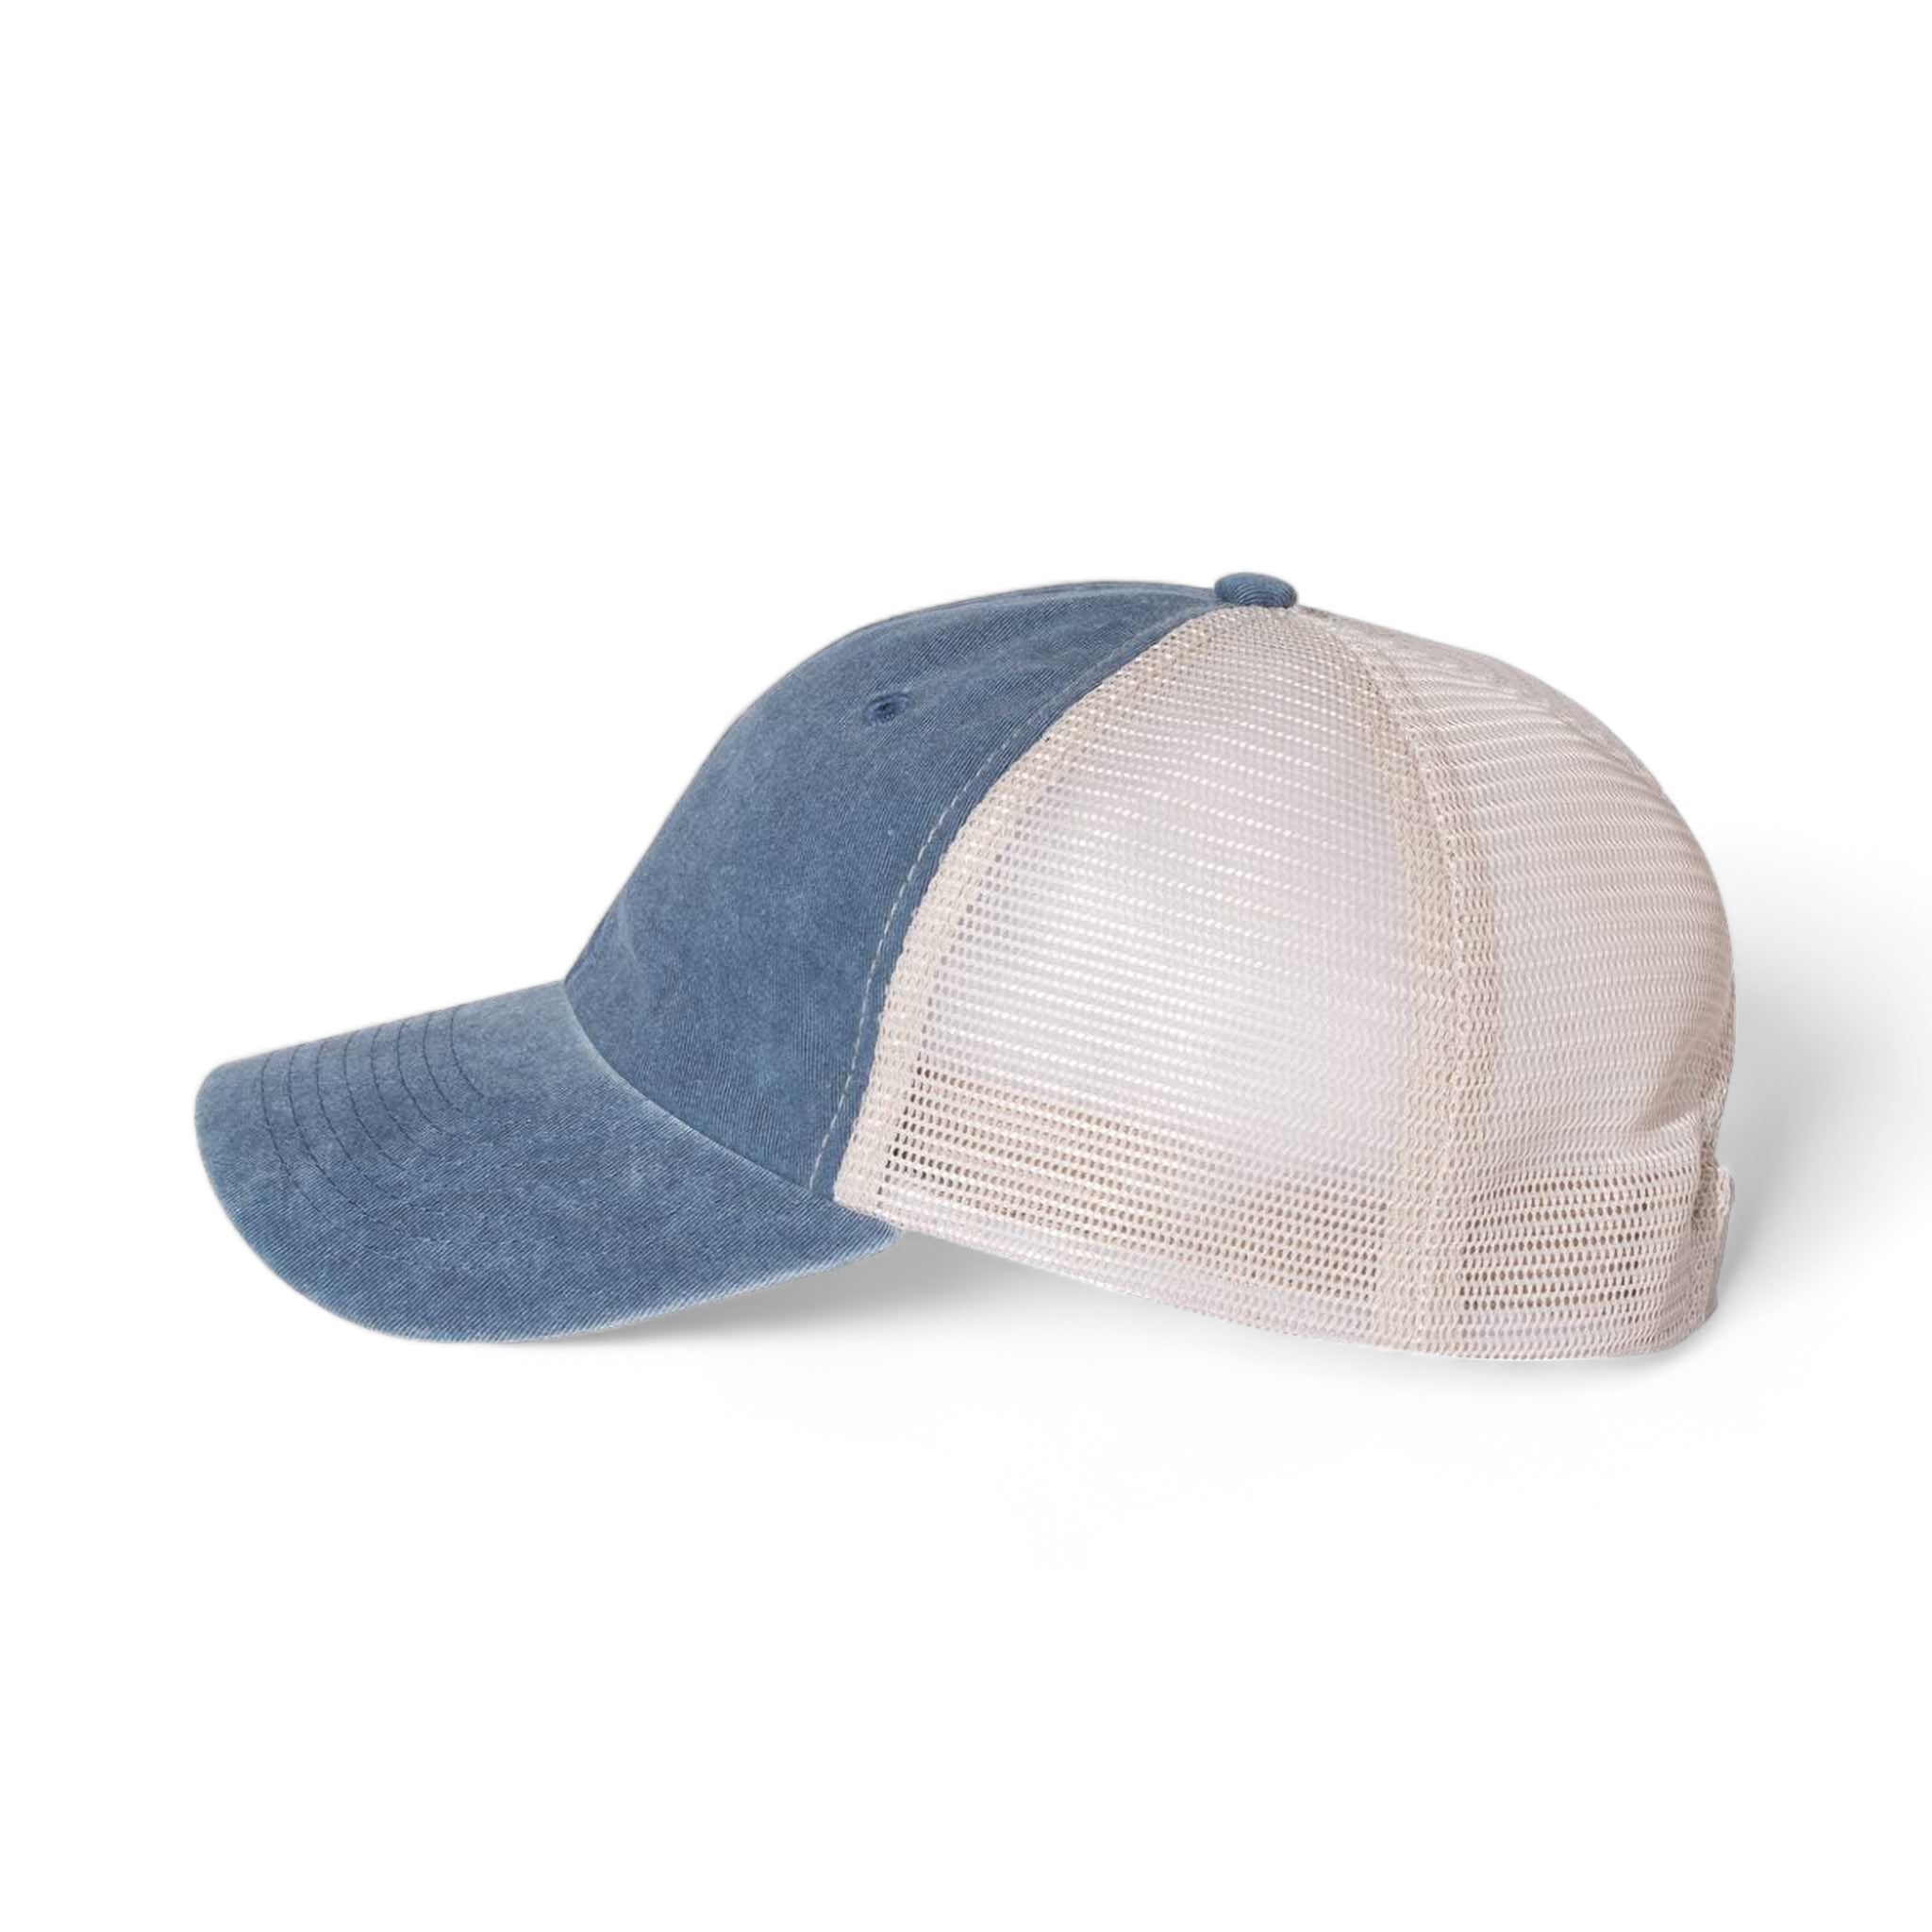 Side view of Sportsman SP510 custom hat in navy and stone